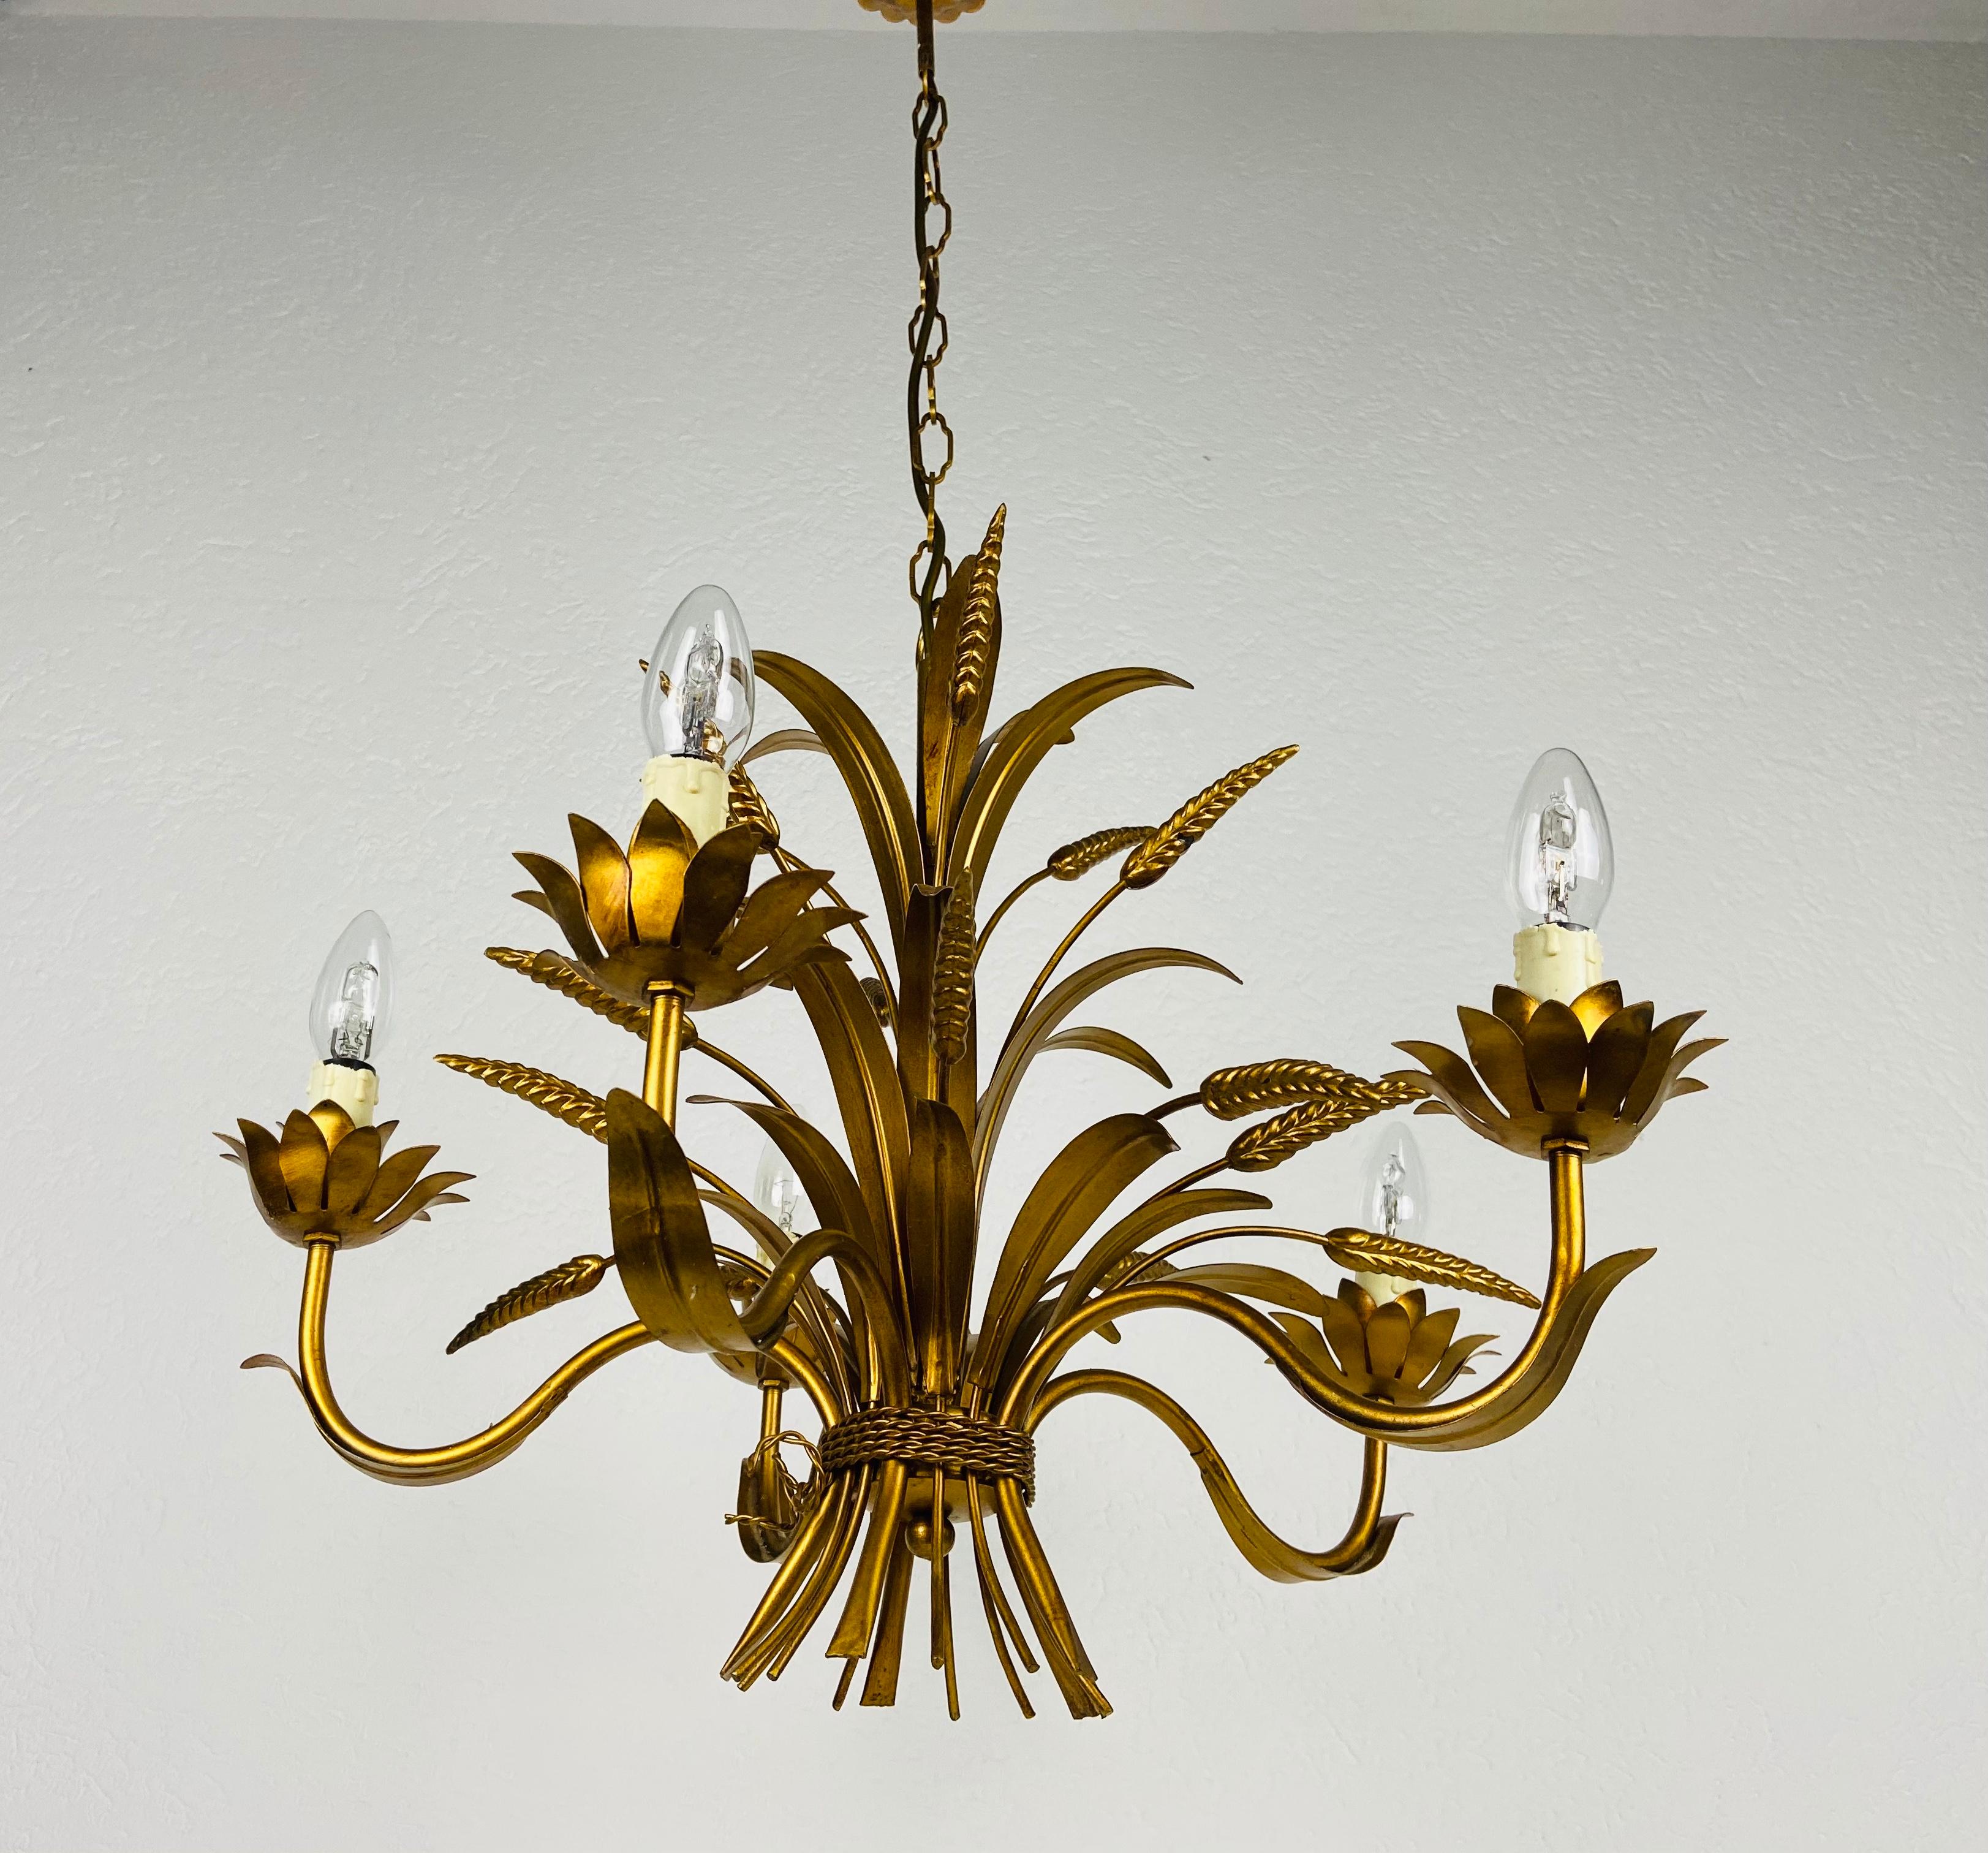 An extraordinary pendant lamp by the German designer Hans Kögl made in Germany in the 1970s. The lamp has a beautiful wheat sheaf design. It is made in the period of Hollywood Regency.

The light requires E14 light bulbs. Works with both 120/220V.